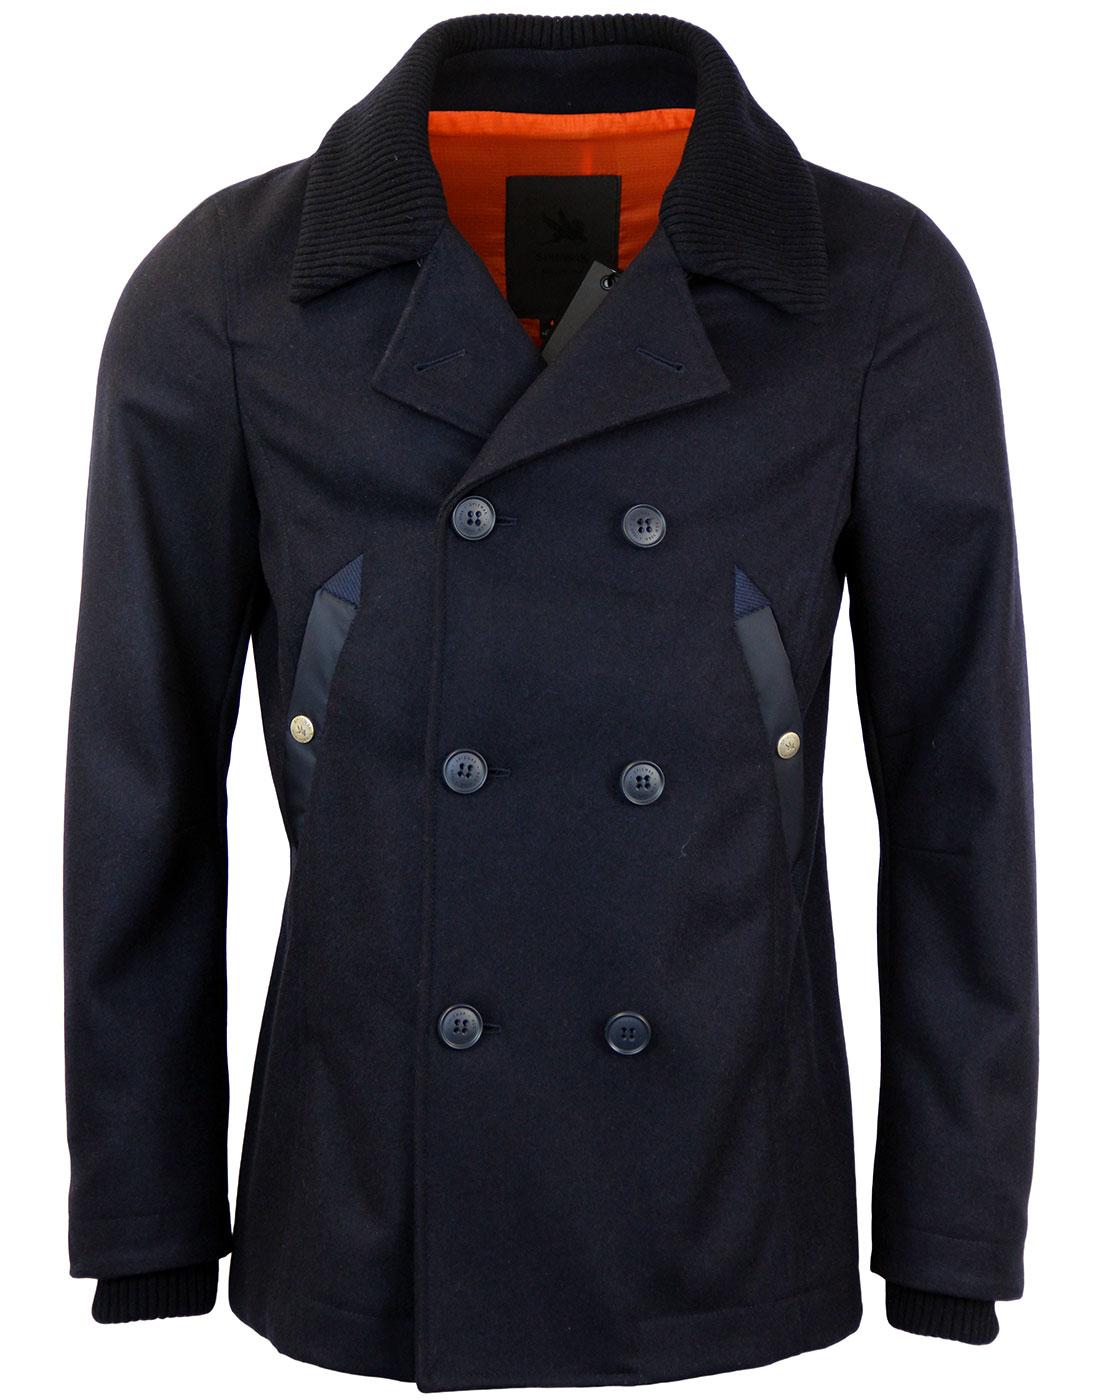 SPIEWAK Mod Wool Military Double Breasted Peacoat